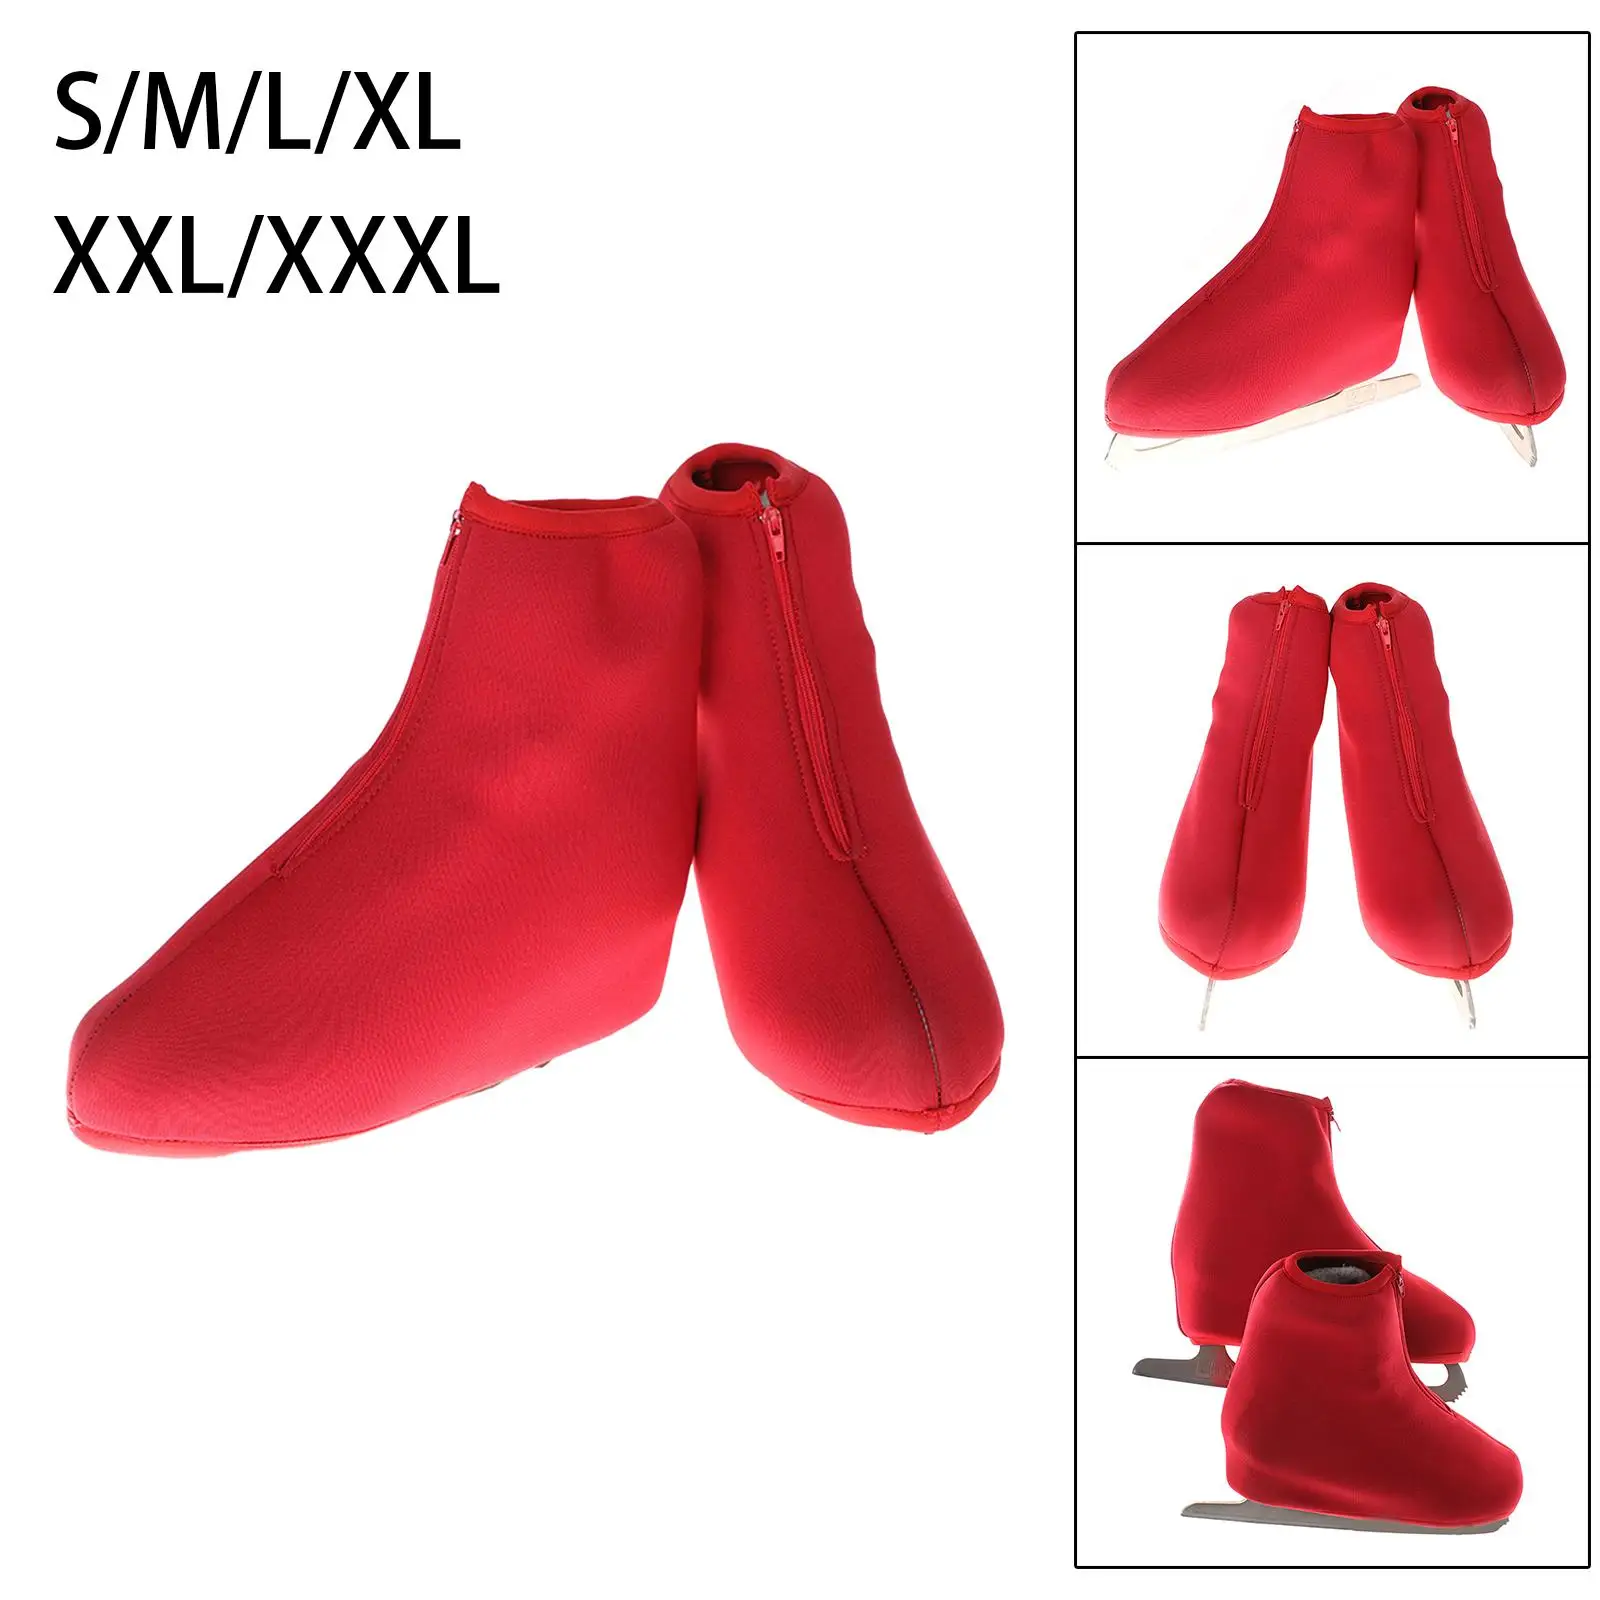 Ice Skate Boot Covers Shoes Protector Lightweight Winter Sports Men Women Protective for Ice Skating Figure Skates Roller Skates